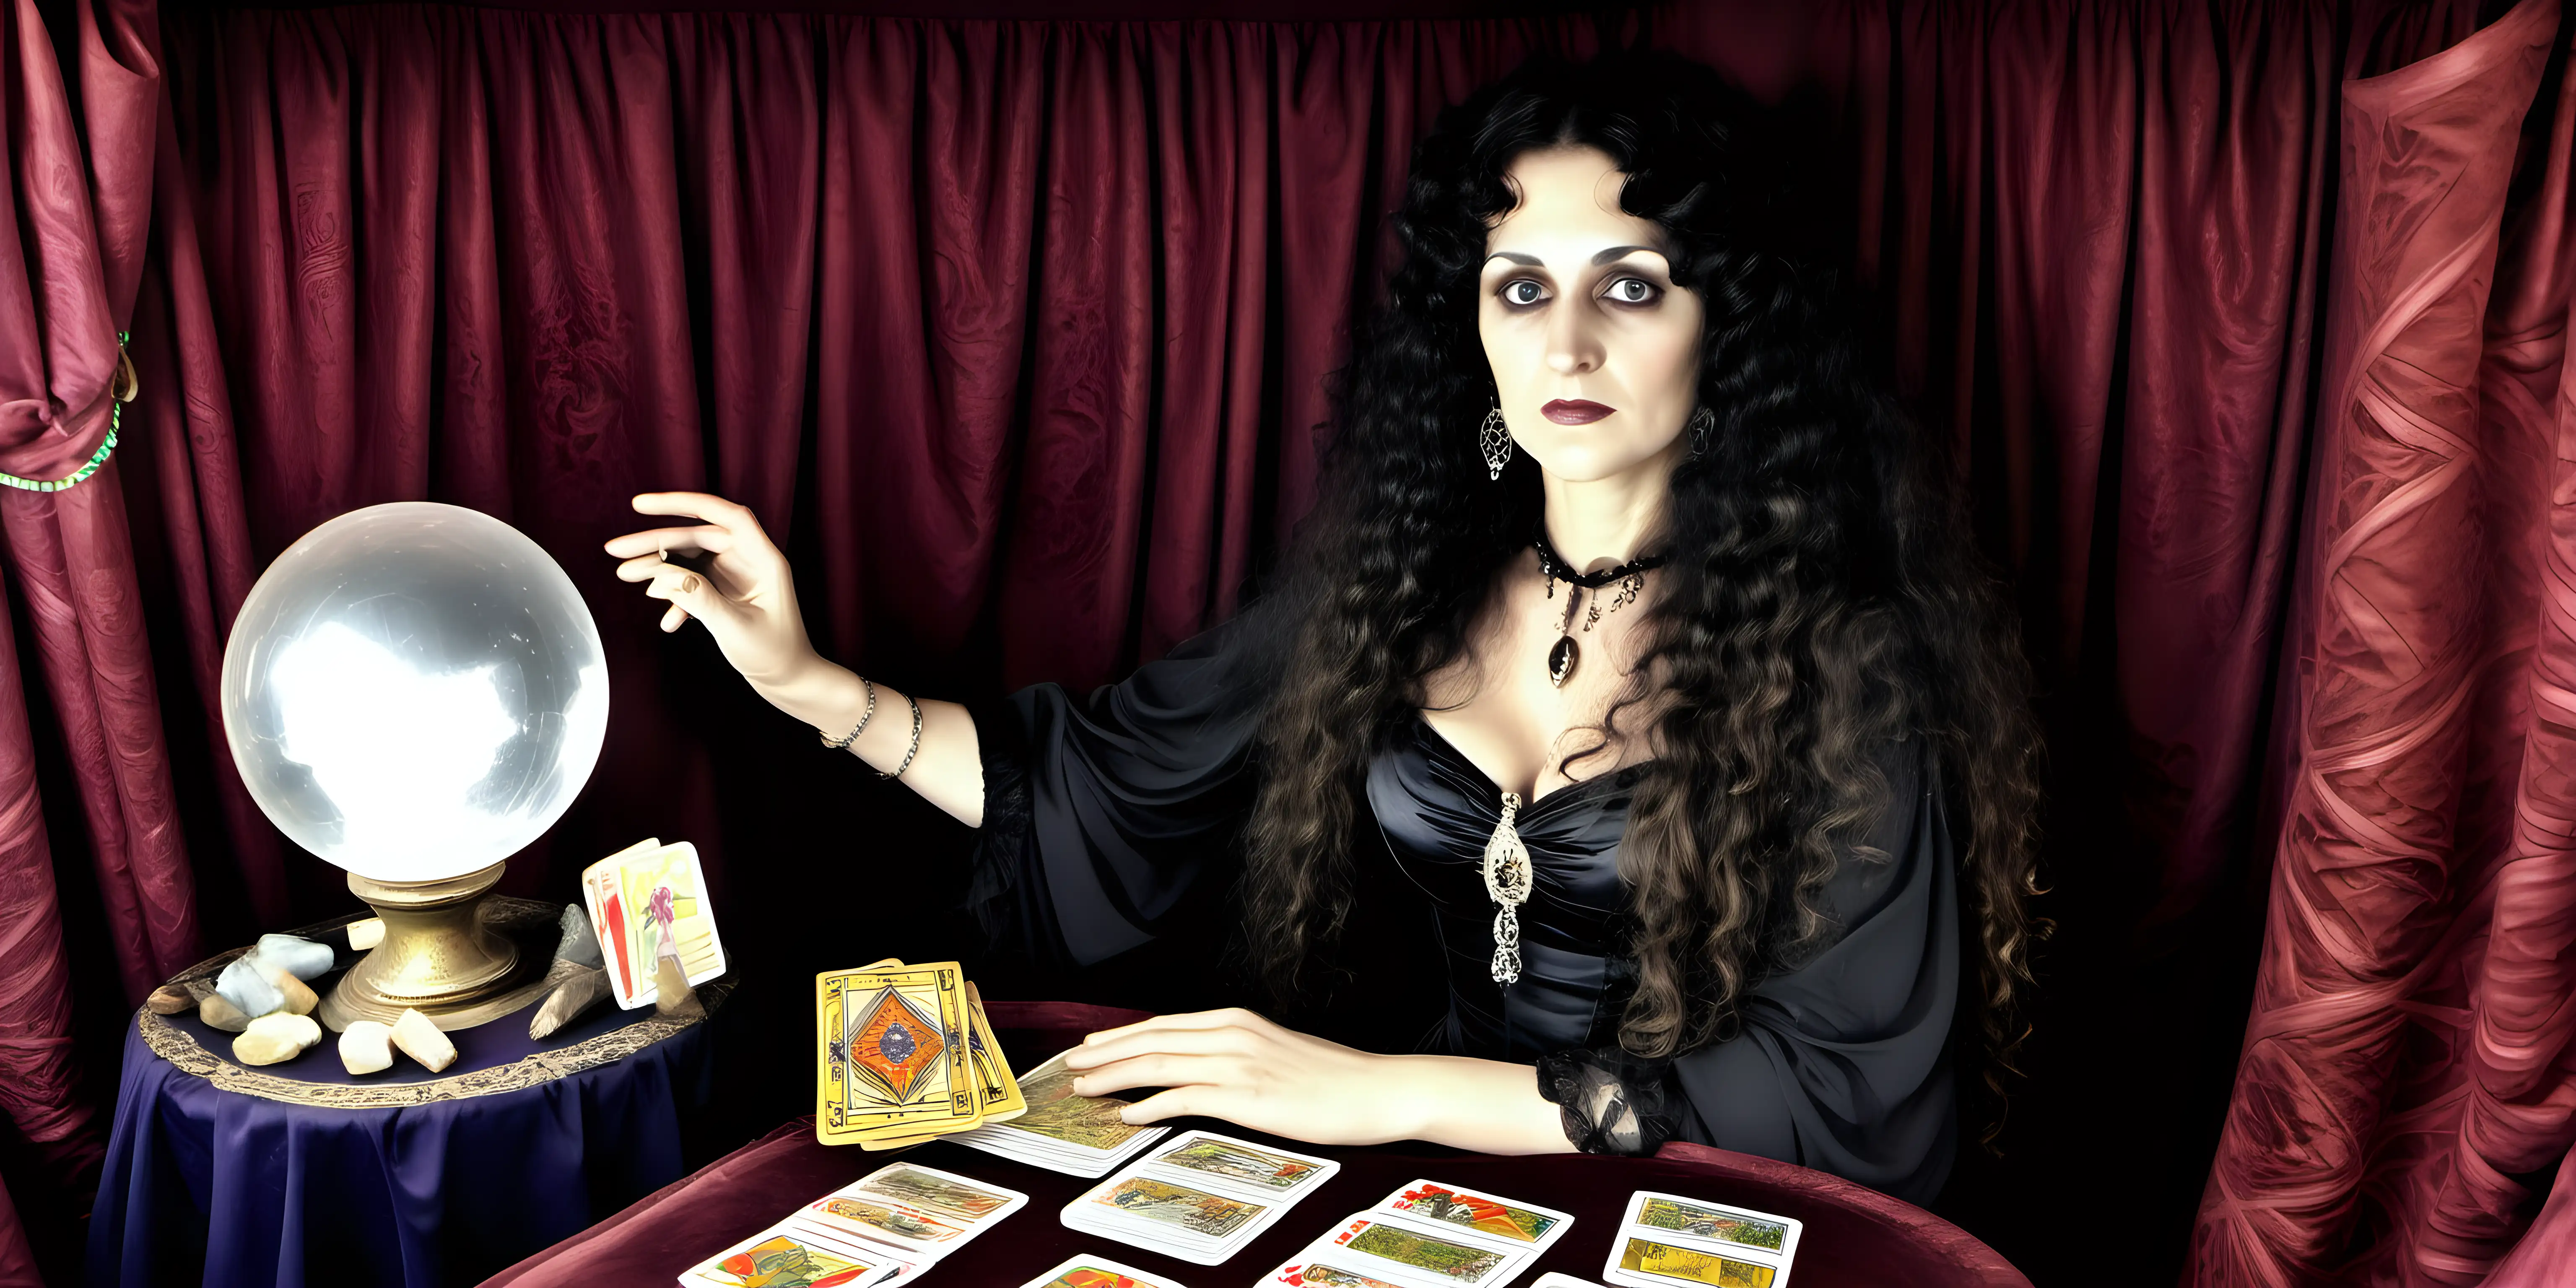 Victorian Gypsy Clairvoyant Lady in Satin Dress with Tarot Cards and Crystal Ball